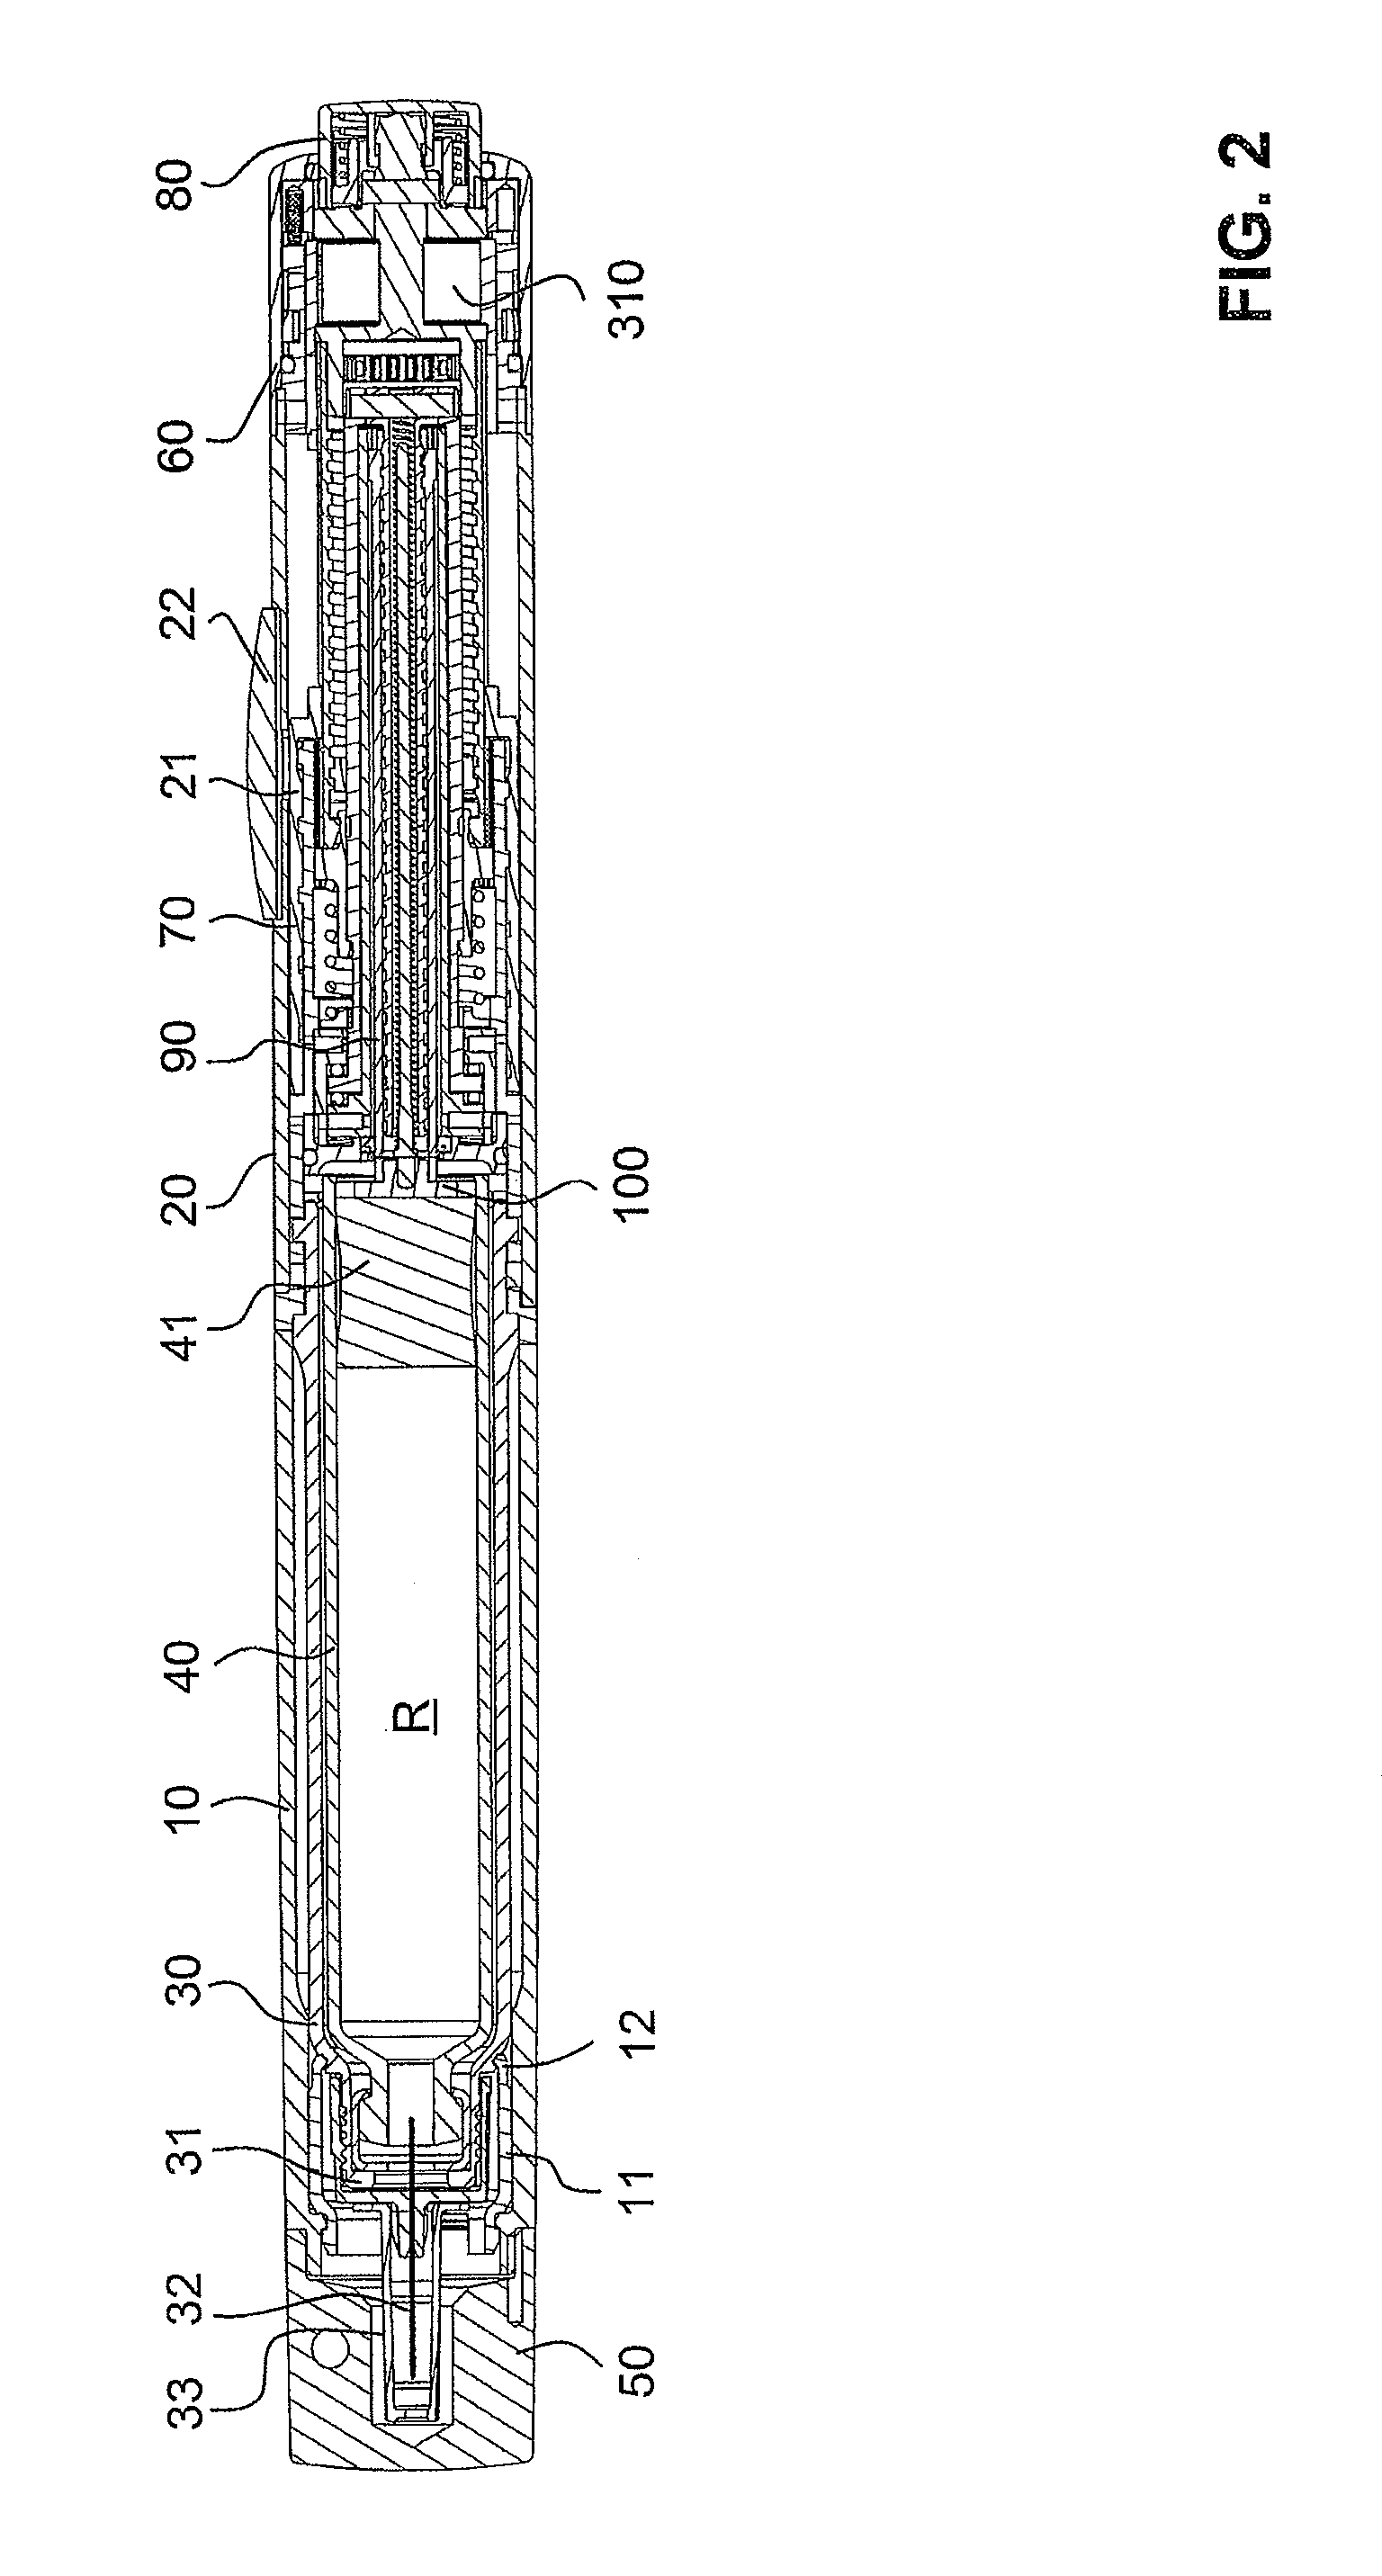 Injection device comprising several coupling mechanisms